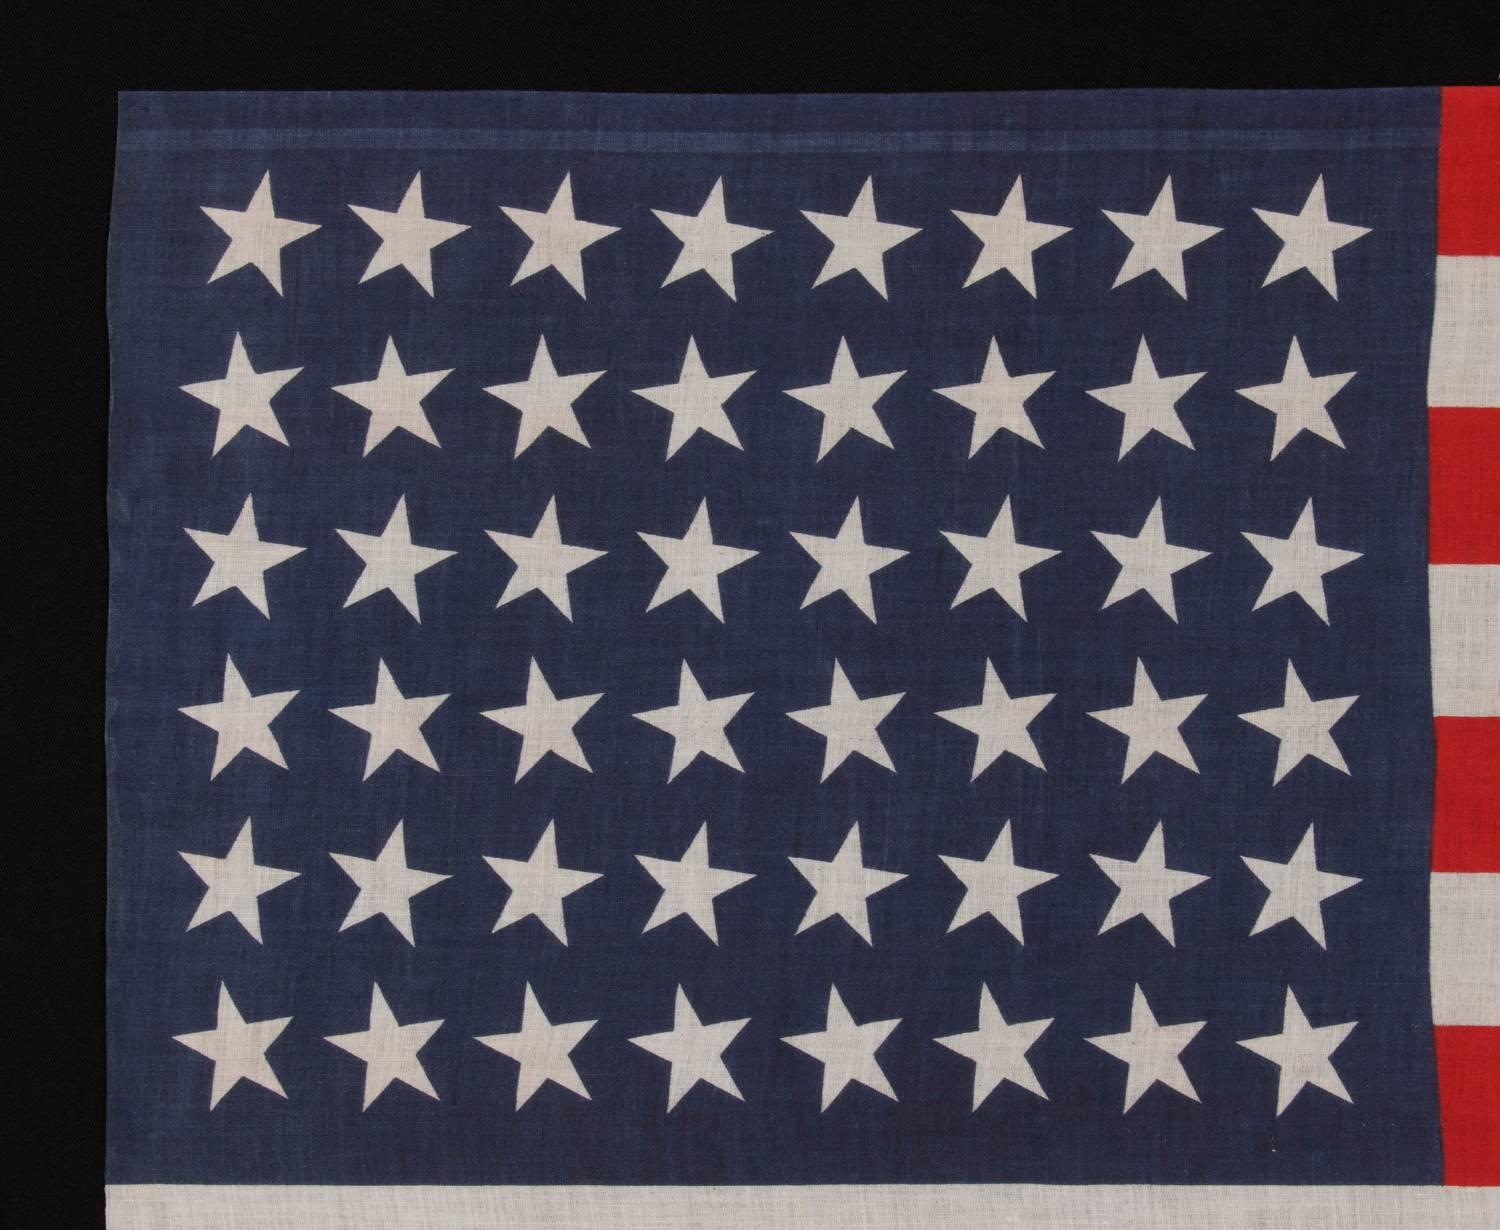 American 48 Stars In A Dancing Rows Pattern, On a Large Scale Parade Flag